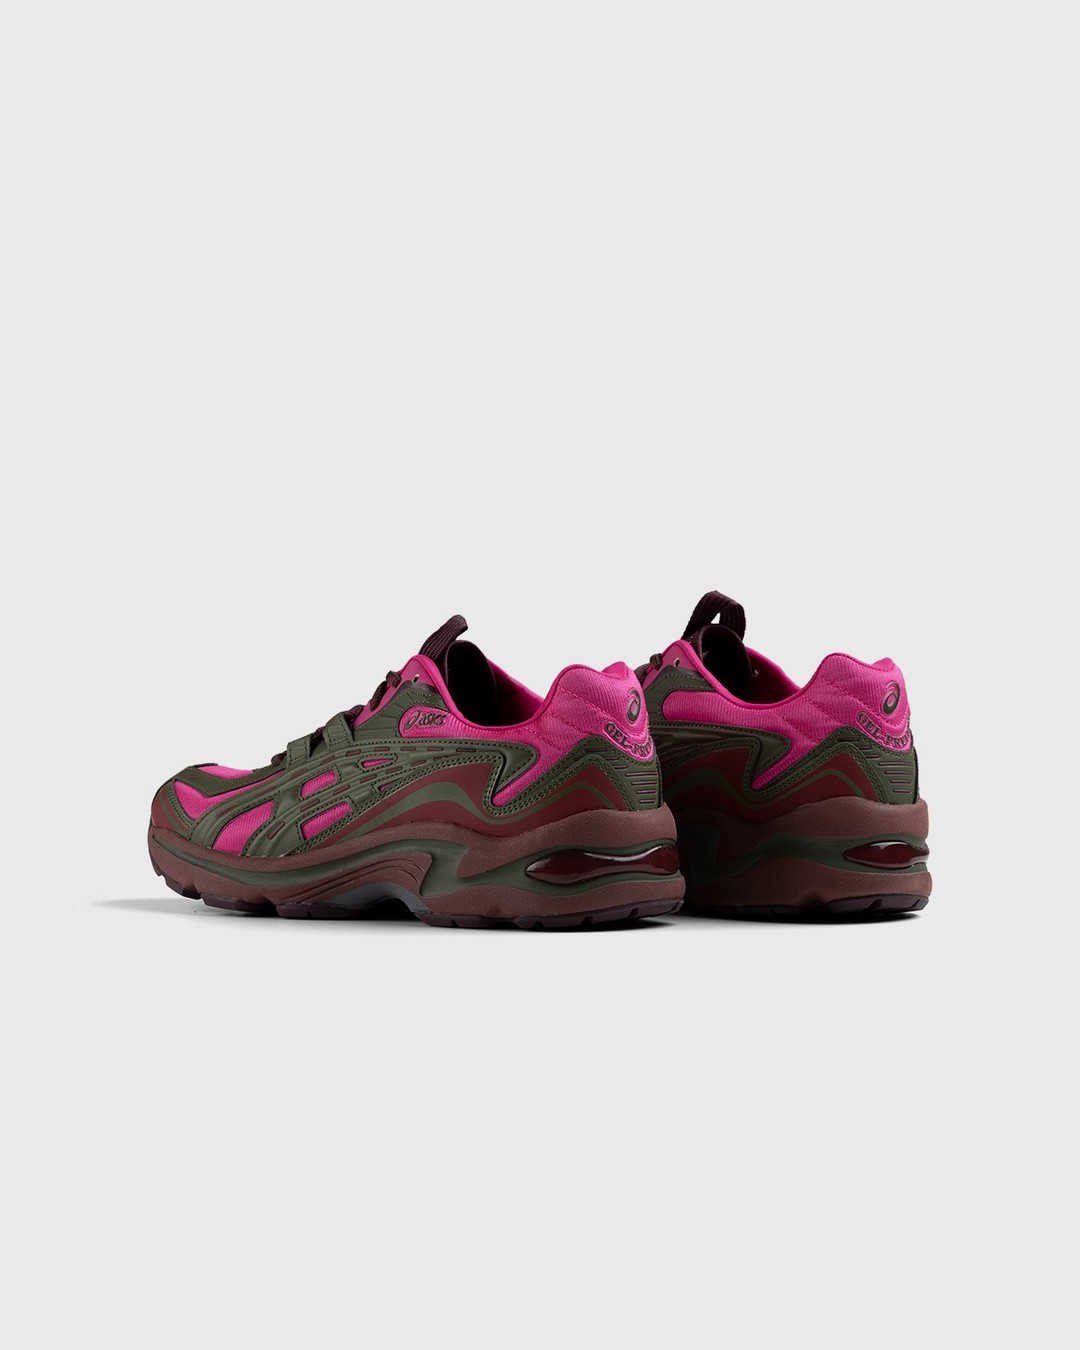 asics – FB1-S Gel-Preleus Pink Rave/Olive Canvas - Low Top Sneakers - Red - Image 3